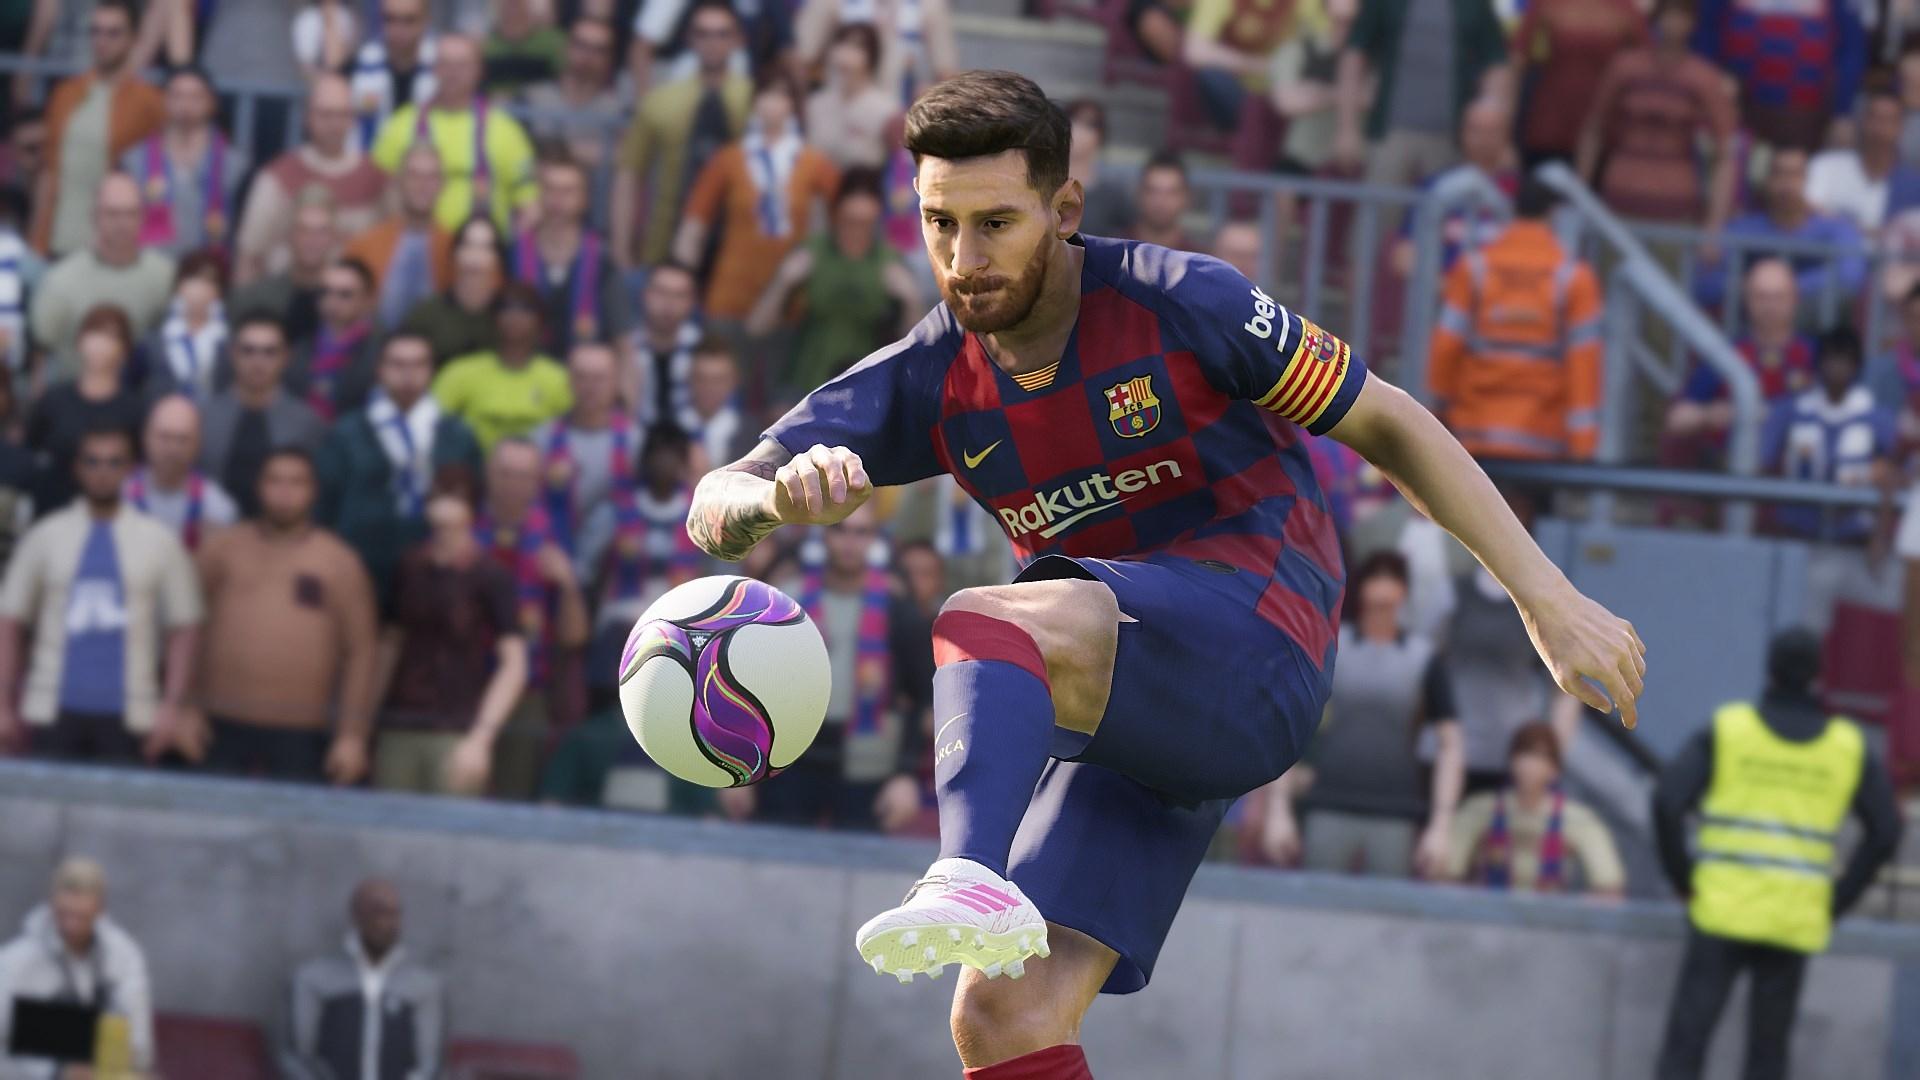 Lionel Messi In eFootball PES 2020 Wallpaper, HD Games 4K Wallpaper, Image, Photo and Background